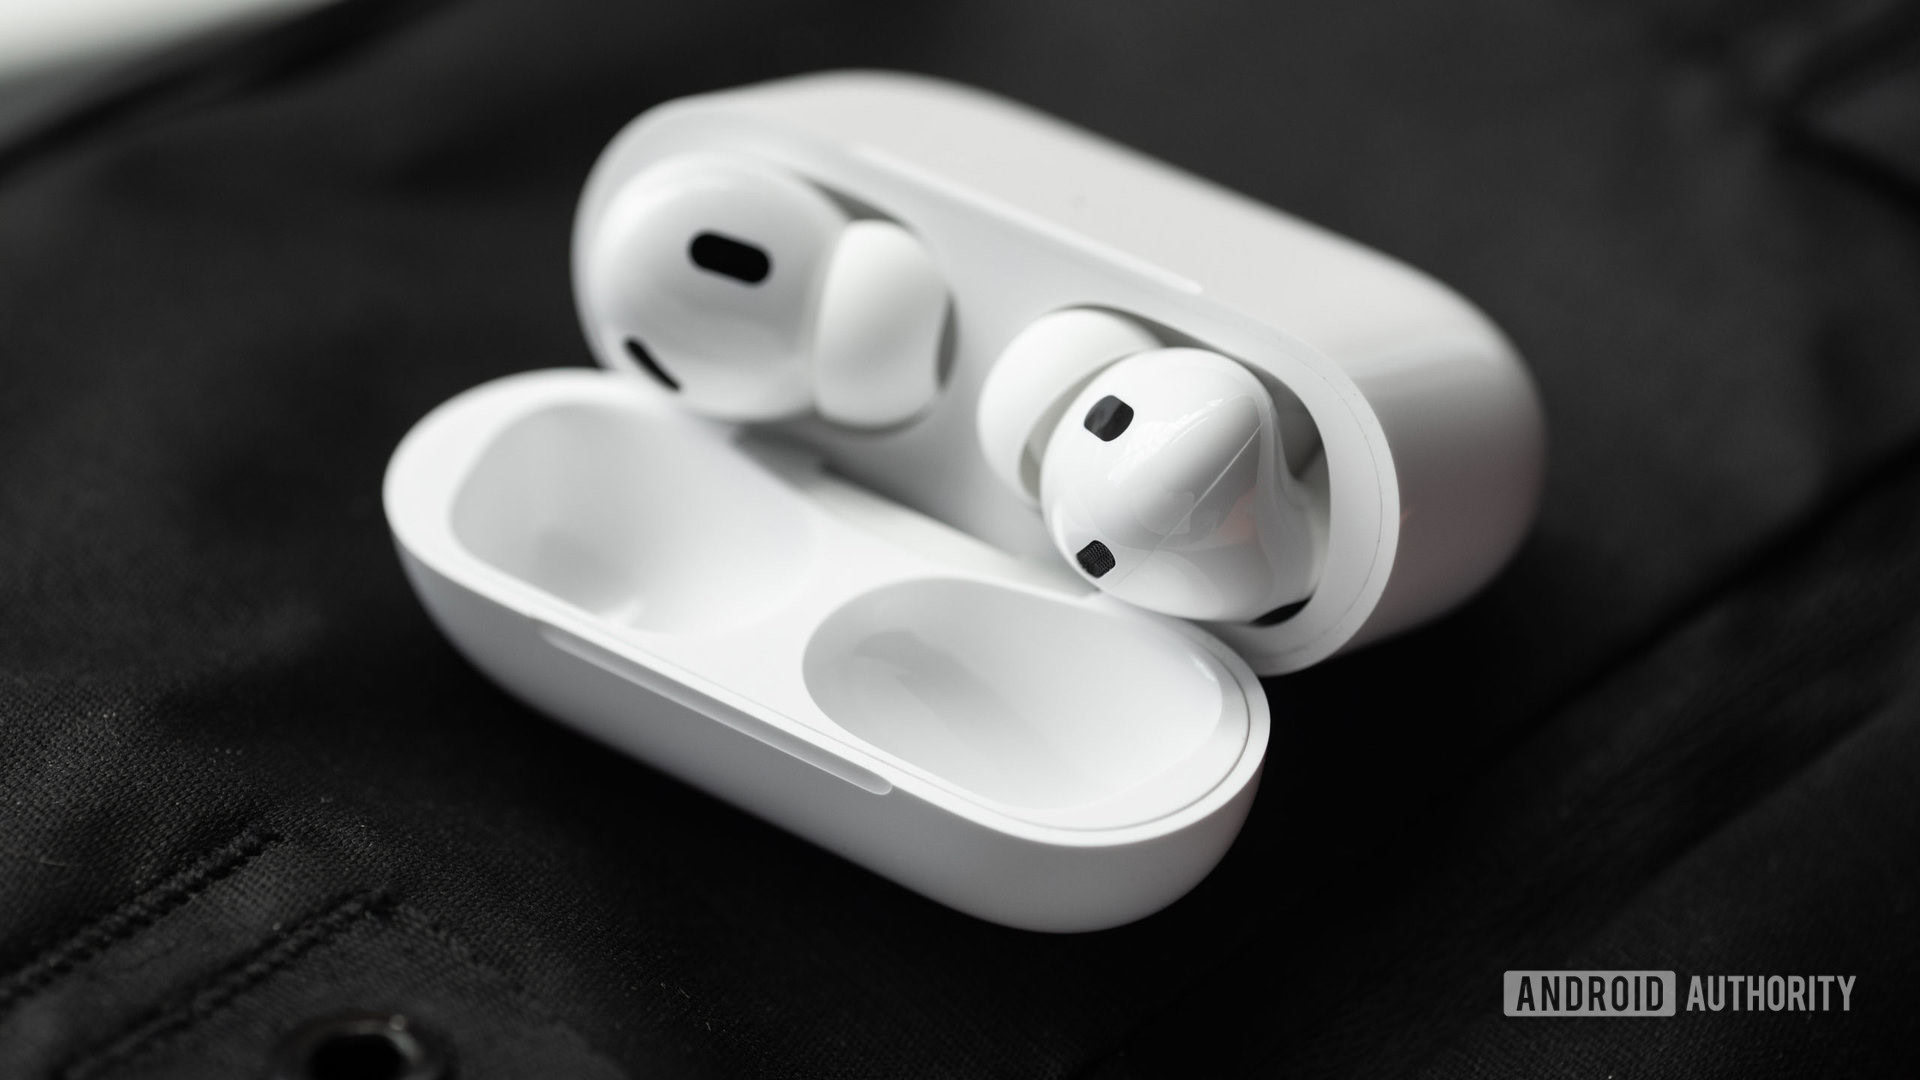 Compare Apple AirPods Pro (2nd Gen) (White) vs OPPO Enco Air 3 True  Wireless Earbuds (Glaze White) - Apple AirPods Pro (2nd Gen) (White) vs OPPO  Enco Air 3 True Wireless Earbuds (